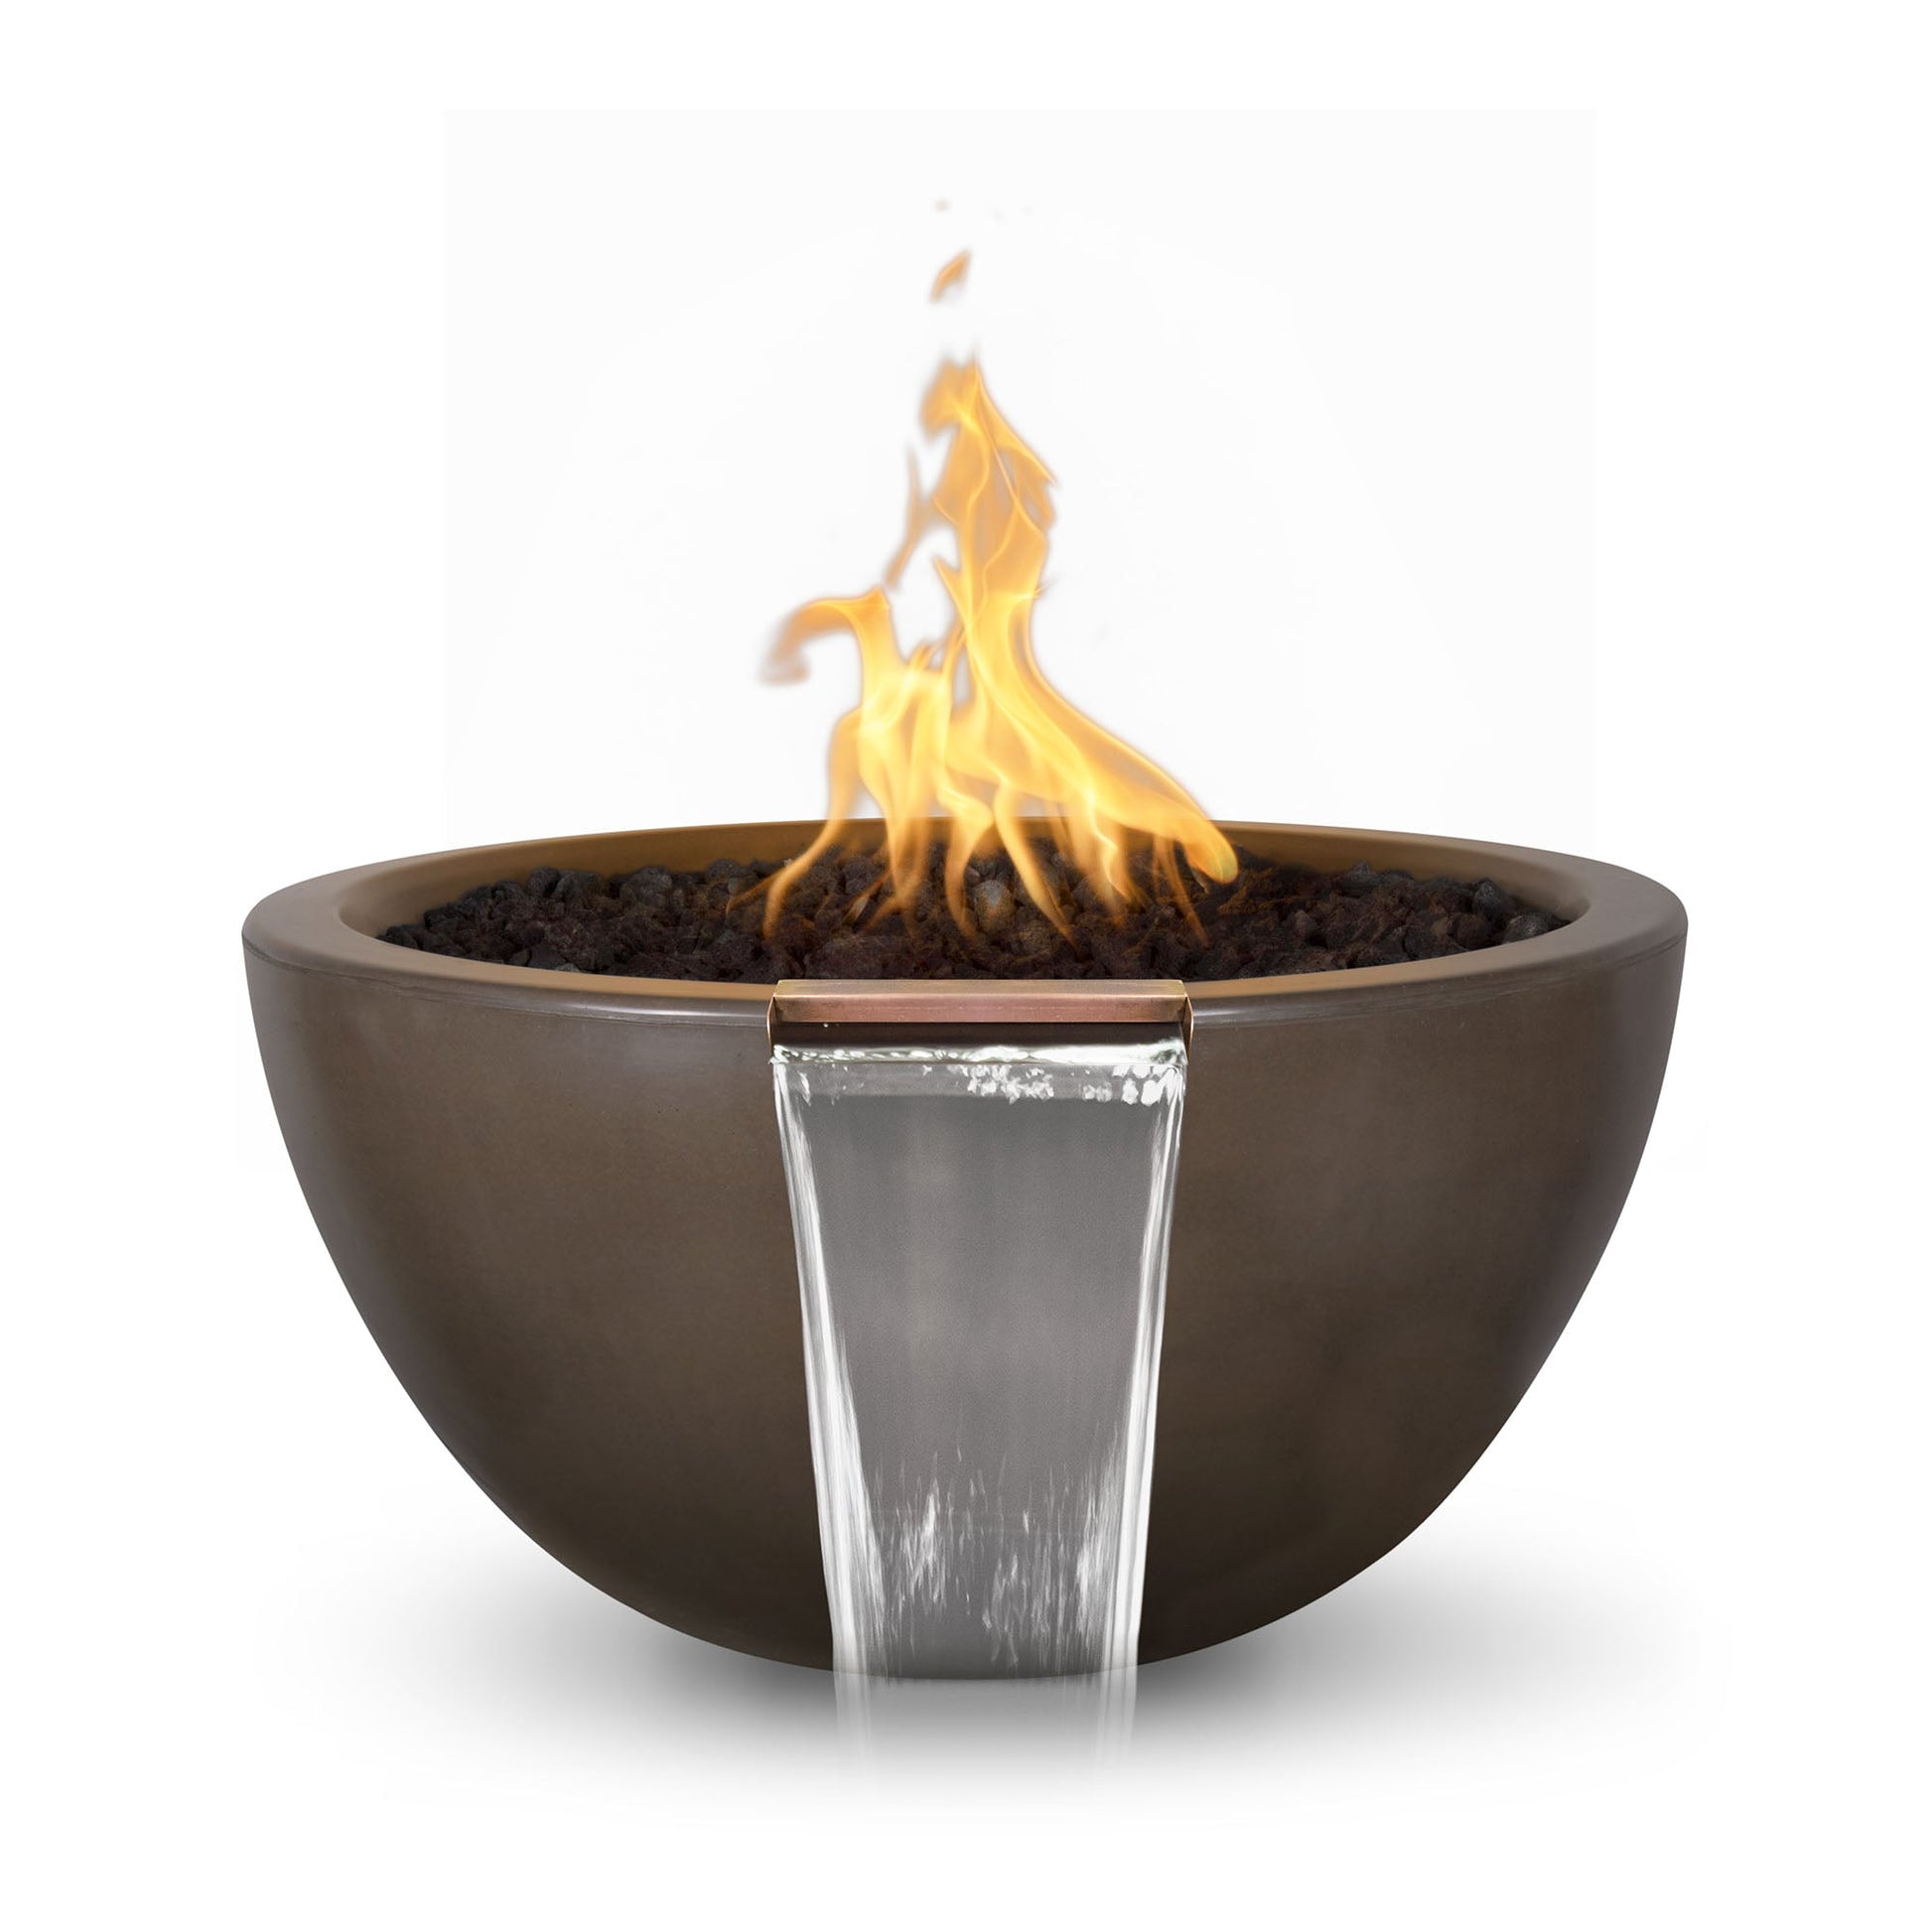 The Outdoor Plus Round Luna 38" Rustic White GFRC Concrete Liquid Propane Fire & Water Bowl with Match Lit with Flame Sense Ignition